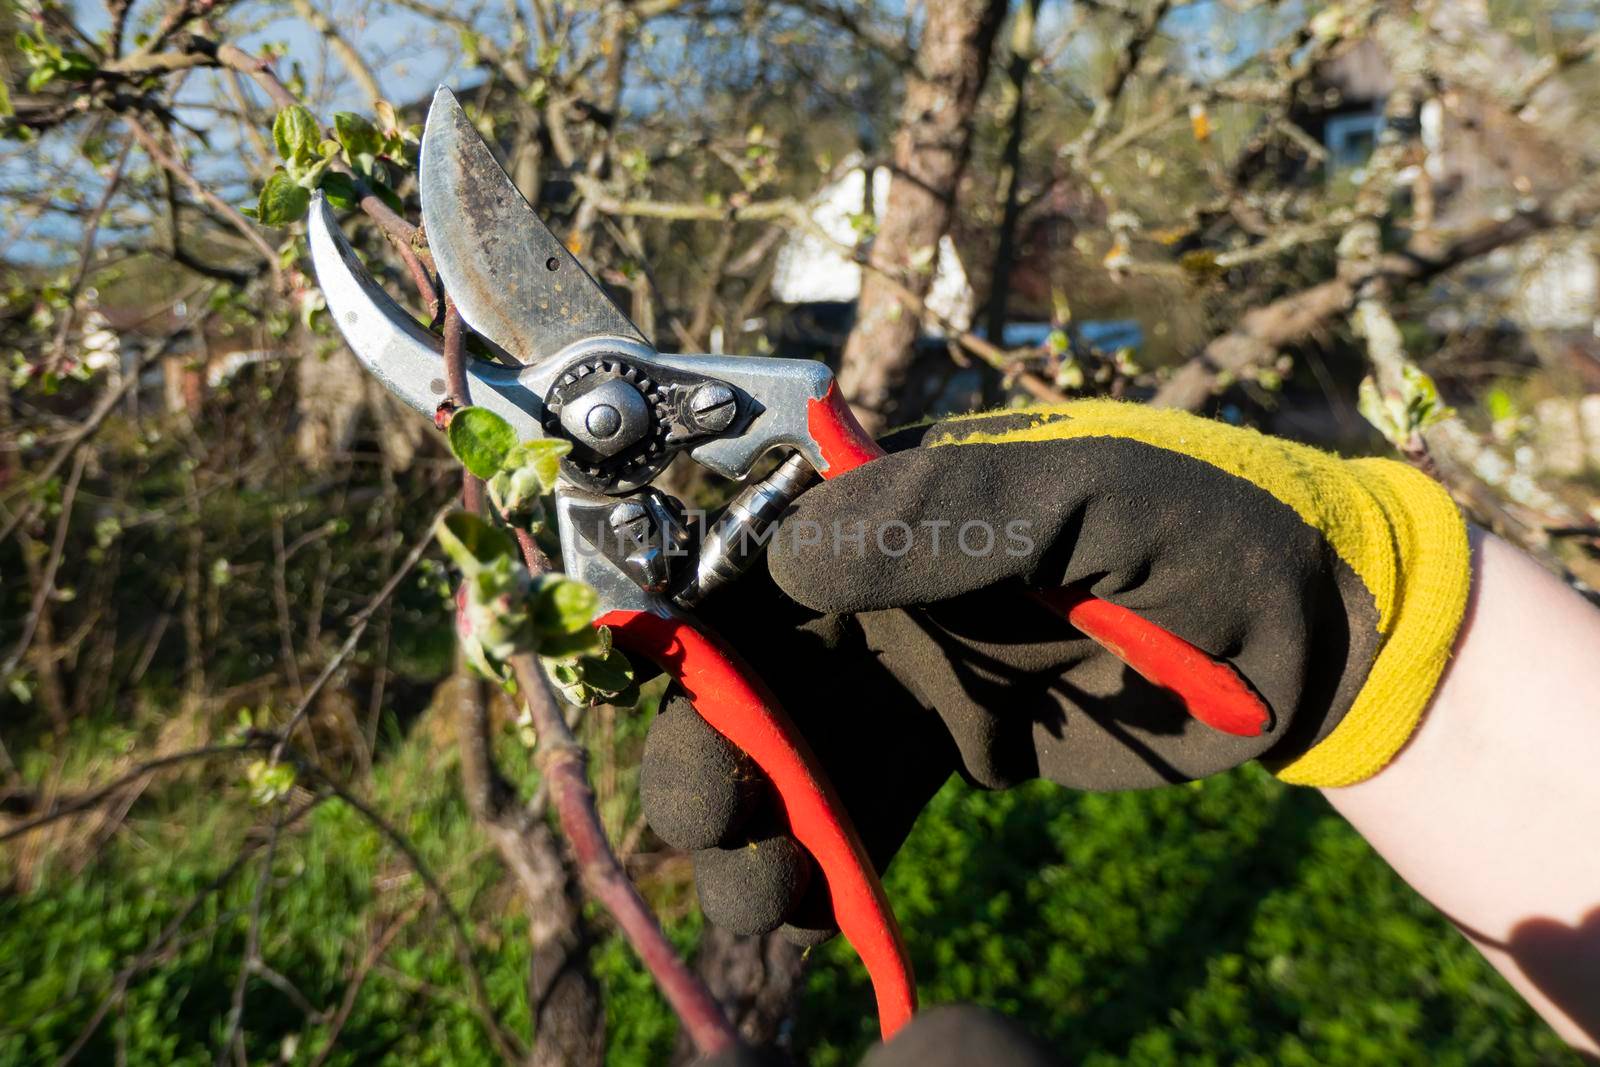 Pruning the garden in early spring. A hand in a working glove with a paper cuts off the branches of an apple tree. Caring for fruit trees in the garden.